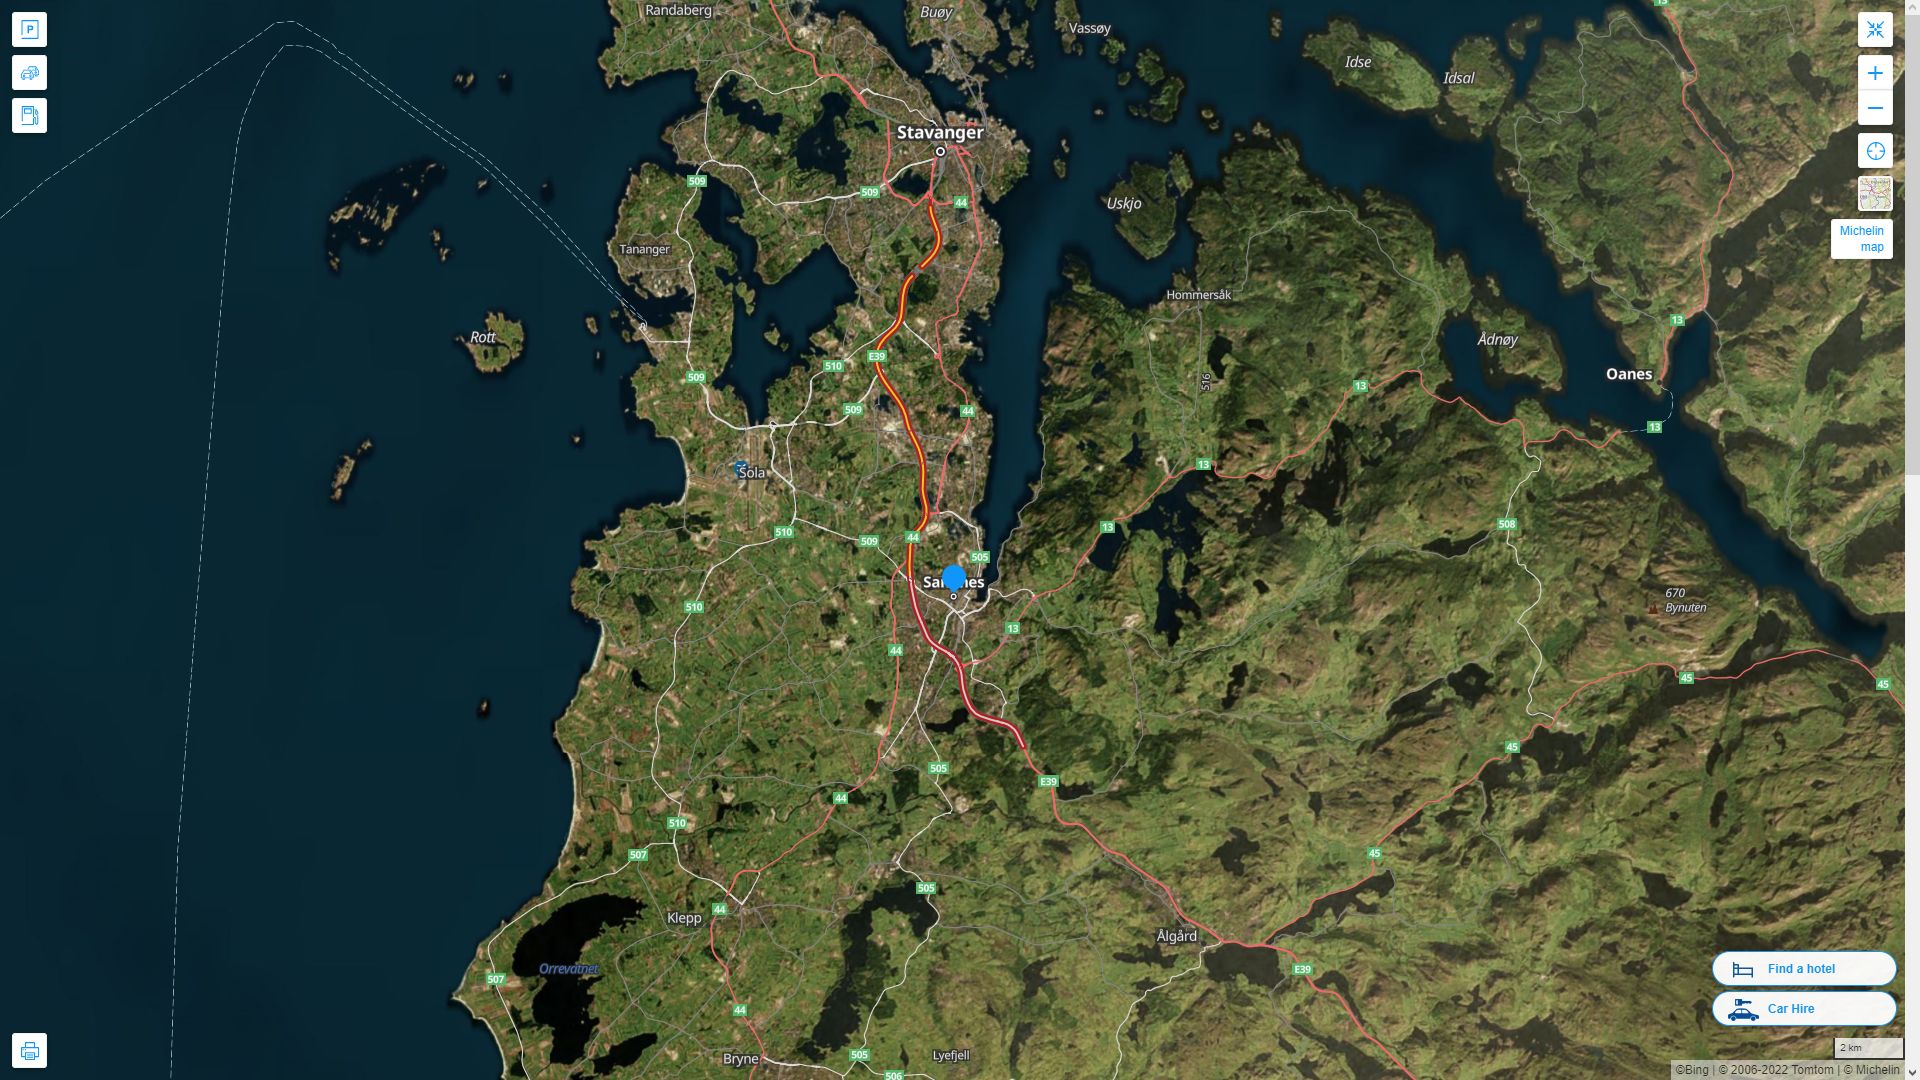 Sandnes Highway and Road Map with Satellite View